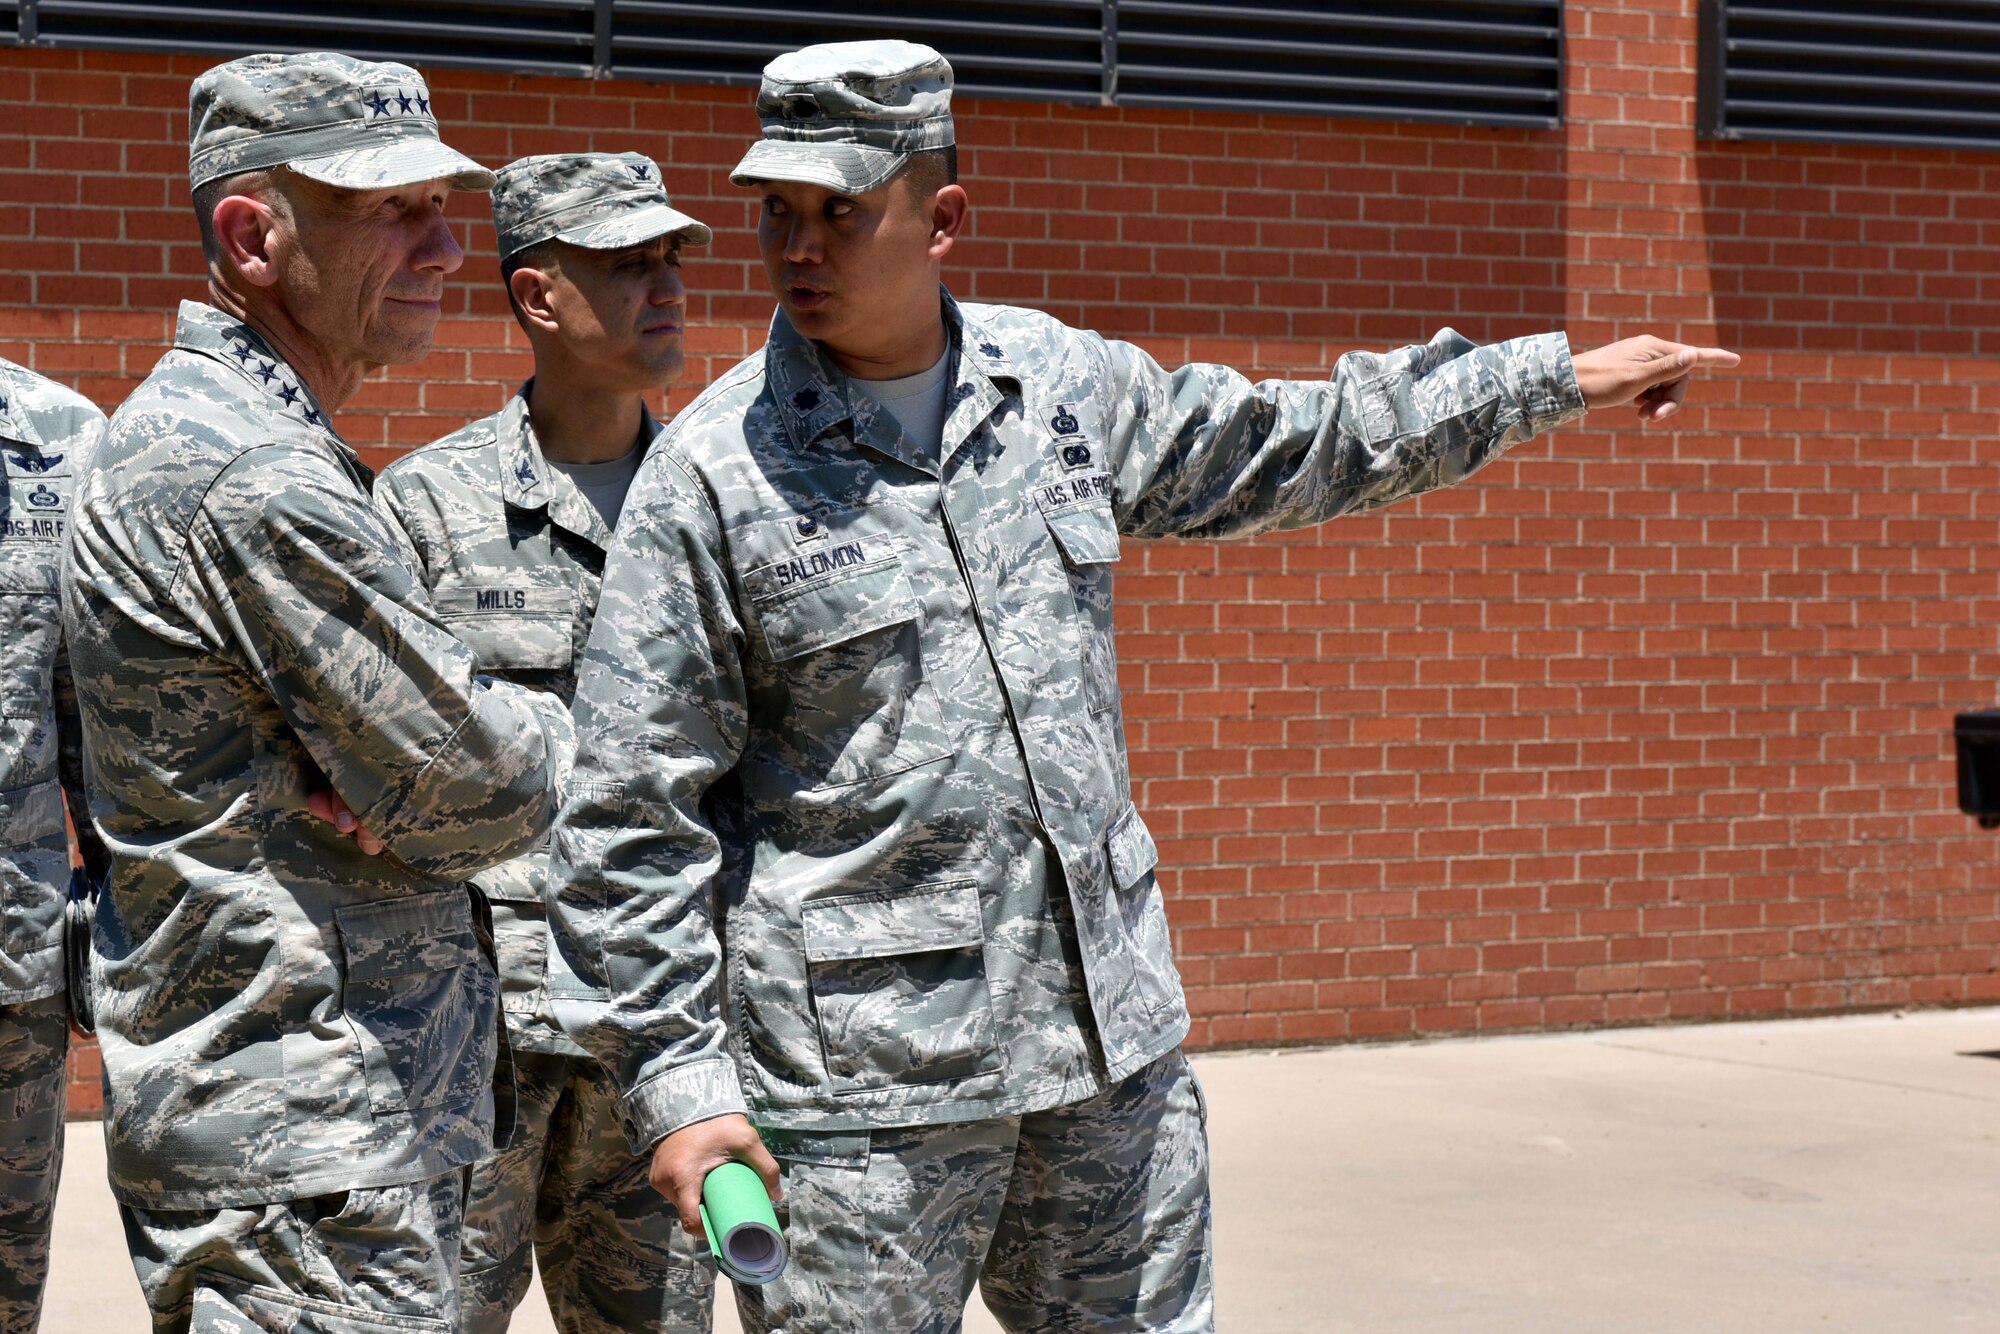 U.S. Air Force Lt. Col. Abraham Salomon, 17th Training Support Squadron commander, speaks with Gen. Mike Holmes, Commander of Air Combat Command, on Goodfellow Air Force Base, Texas, May 30, 2018. Holmes visited Goodfellow to understand the intelligence, surveillance, reconnaissance training and to meet with San Angelo civic leaders. (U.S. Air Force photo by Senior Airman Randall Moose/Released)